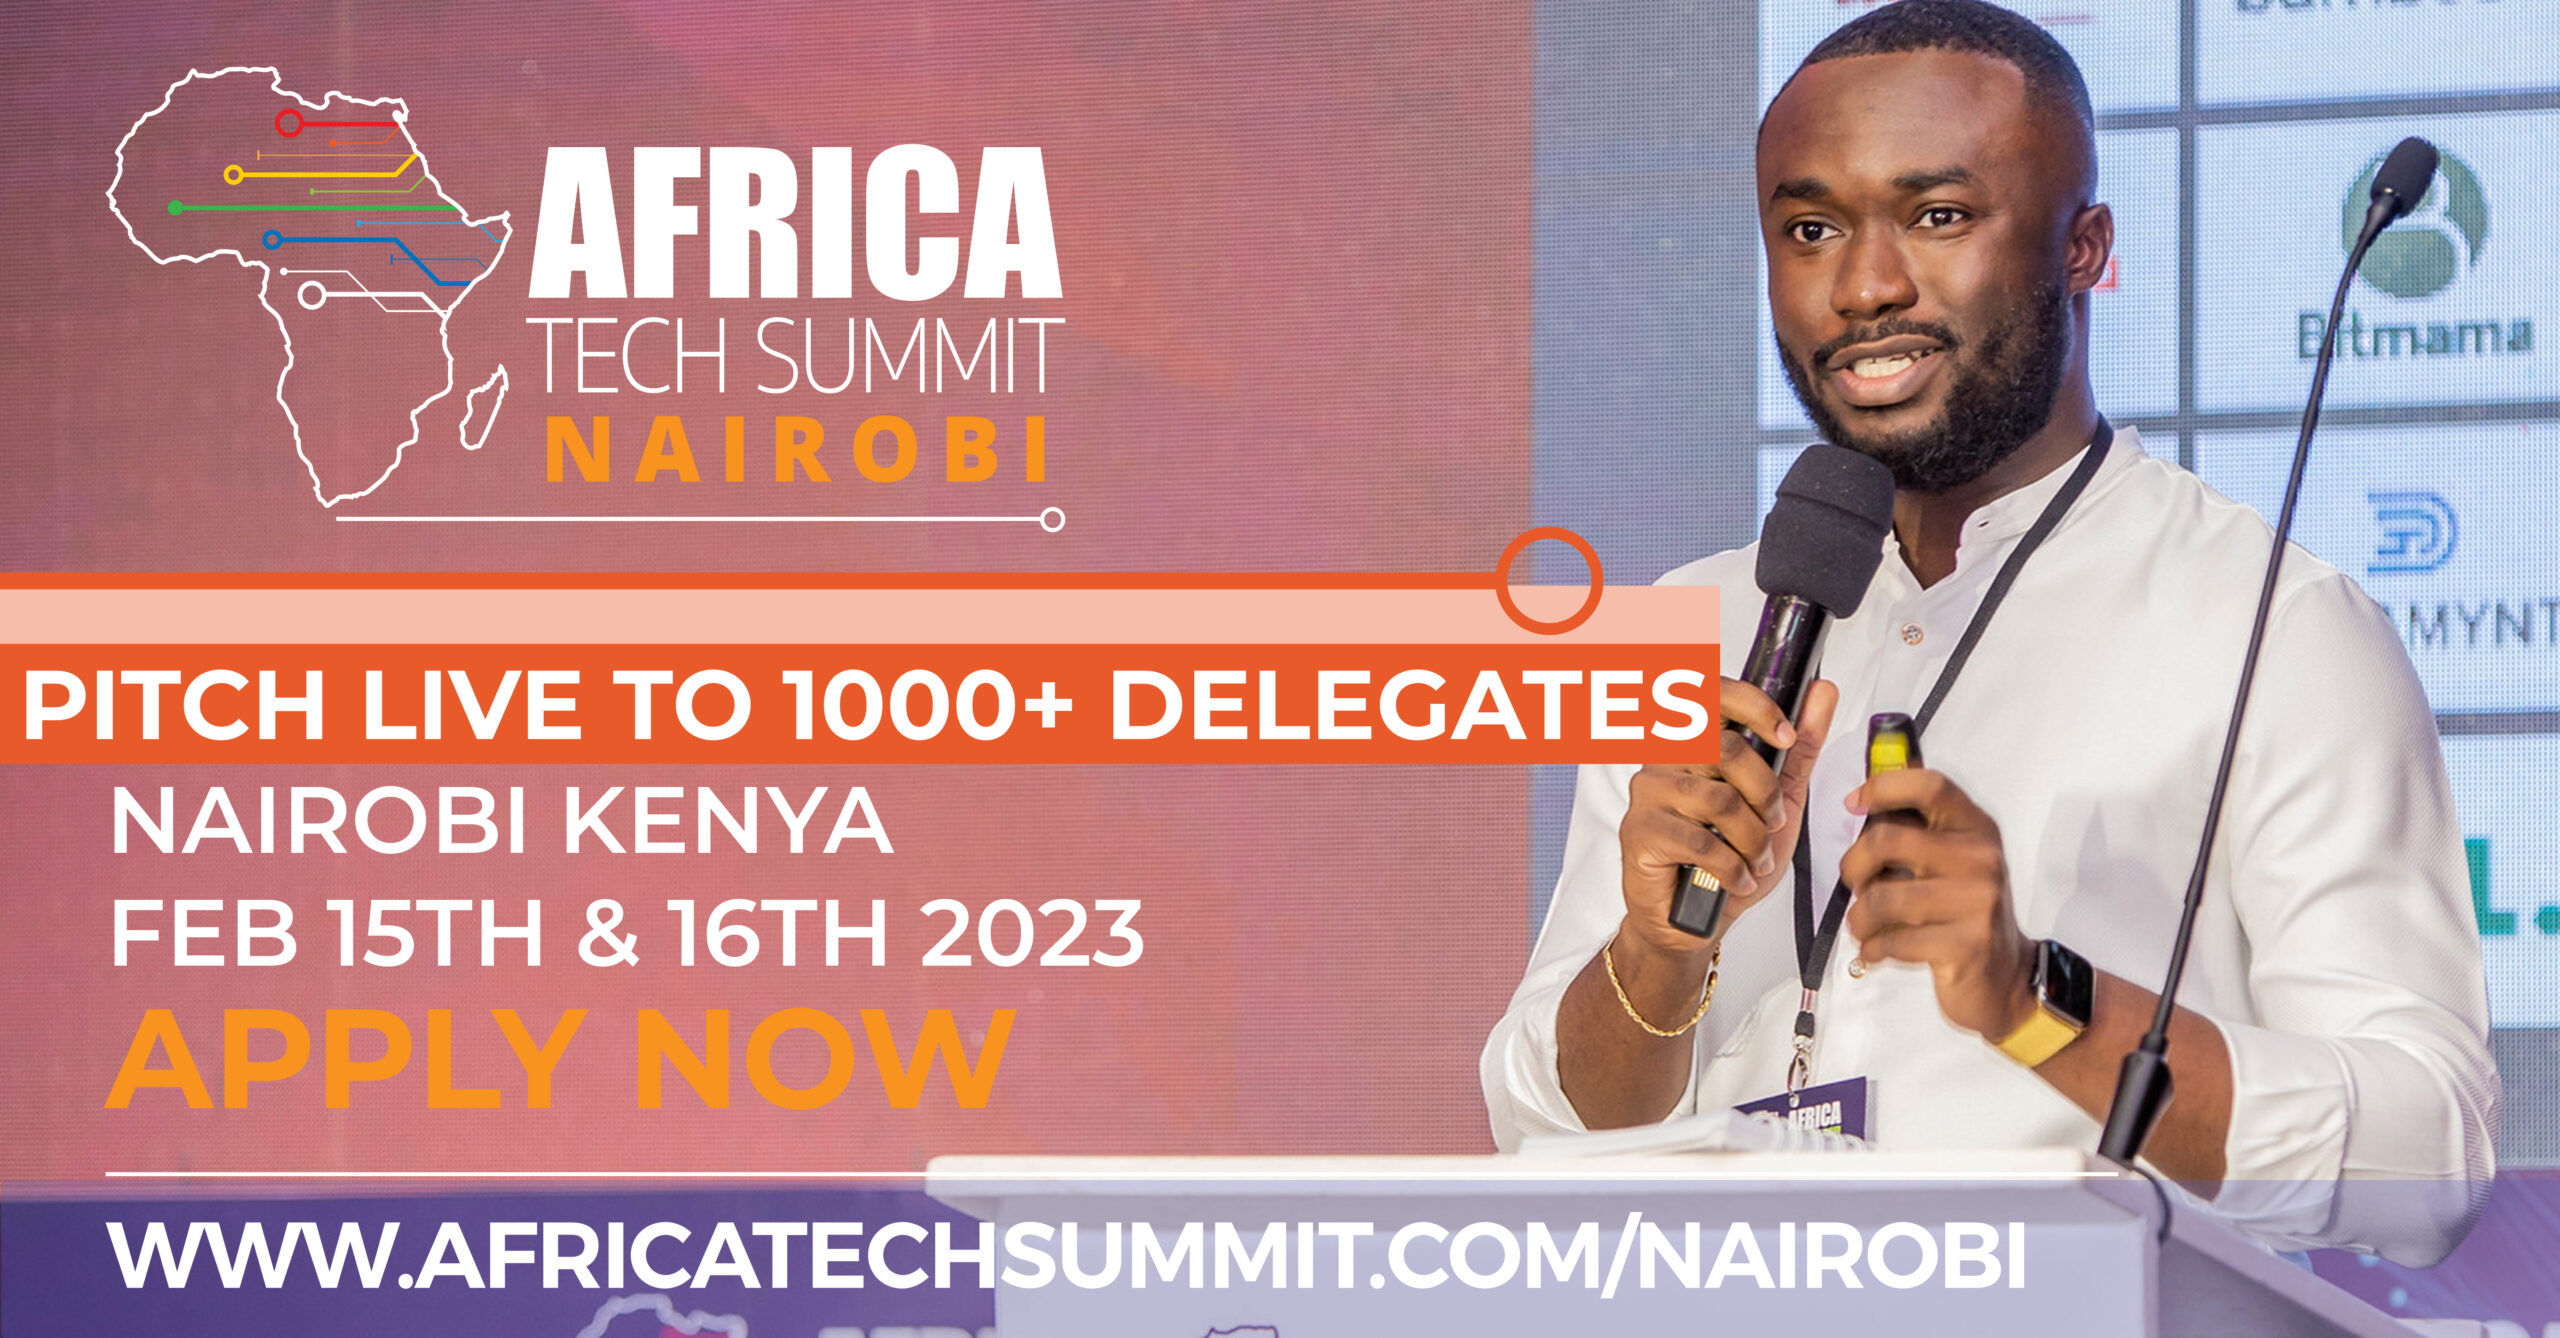 Startups Invited to Pitch Live at Africa Tech Summit Nairobi 2023